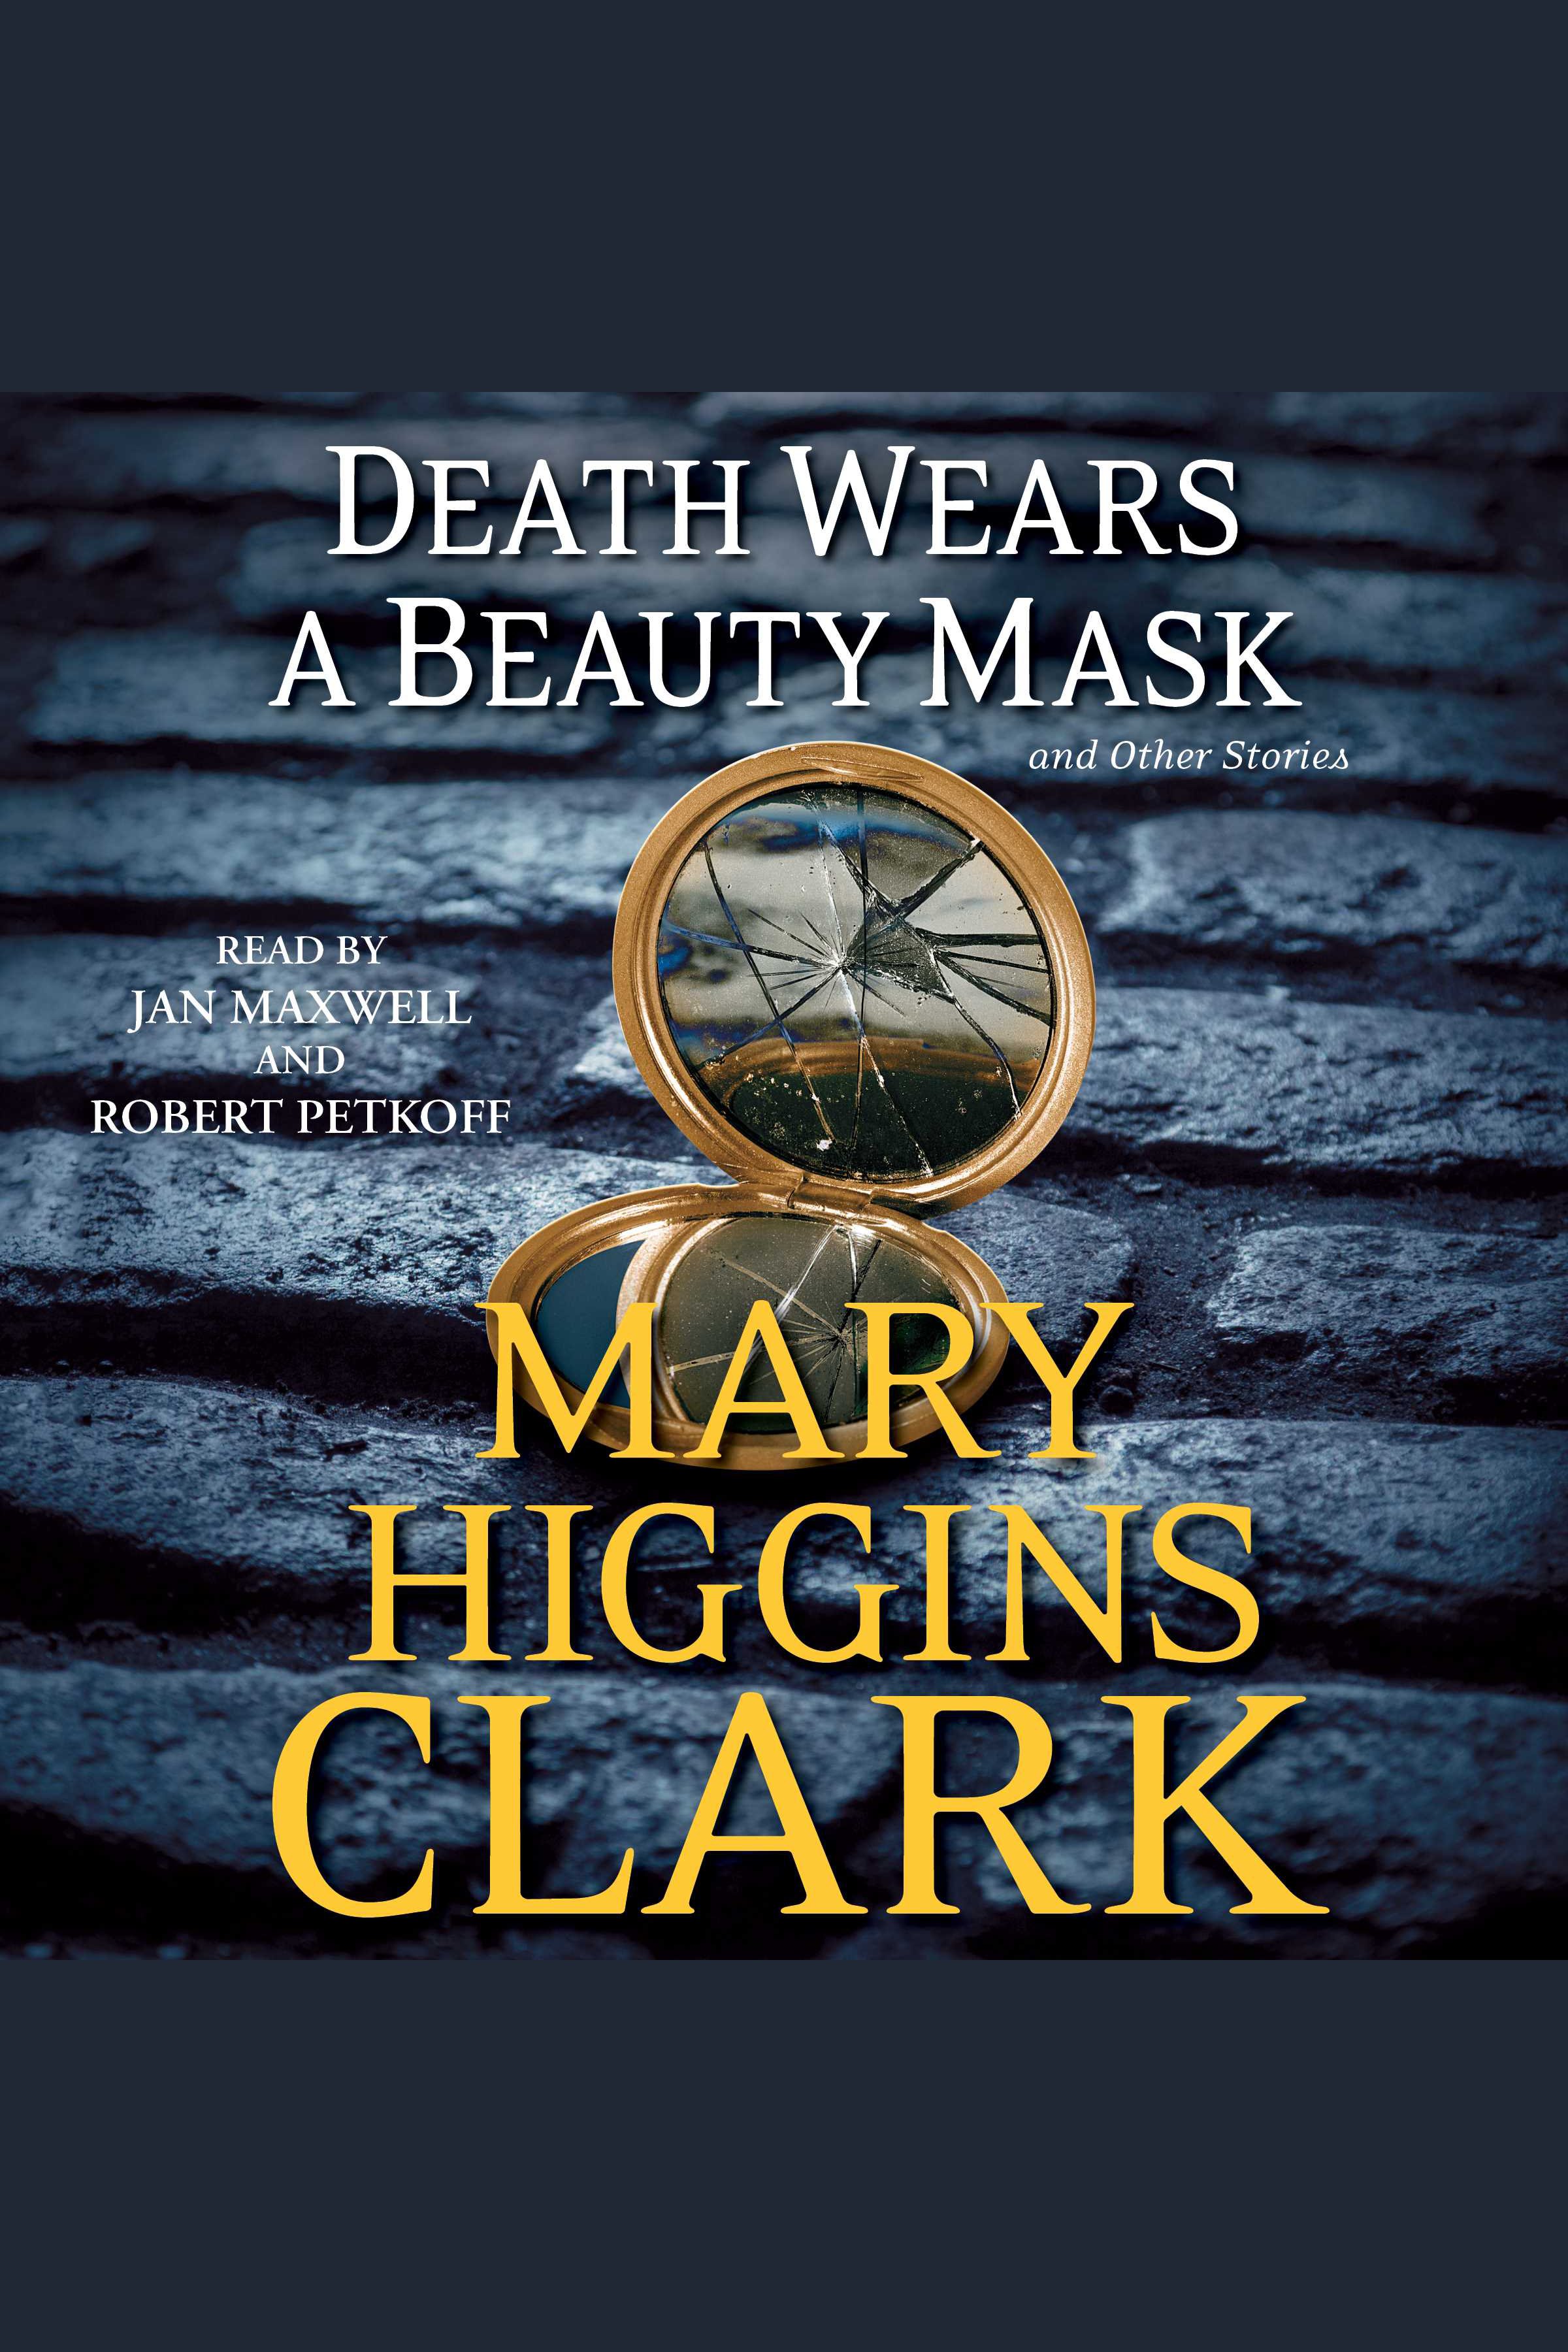 Death wears a beauty mask and other stories cover image